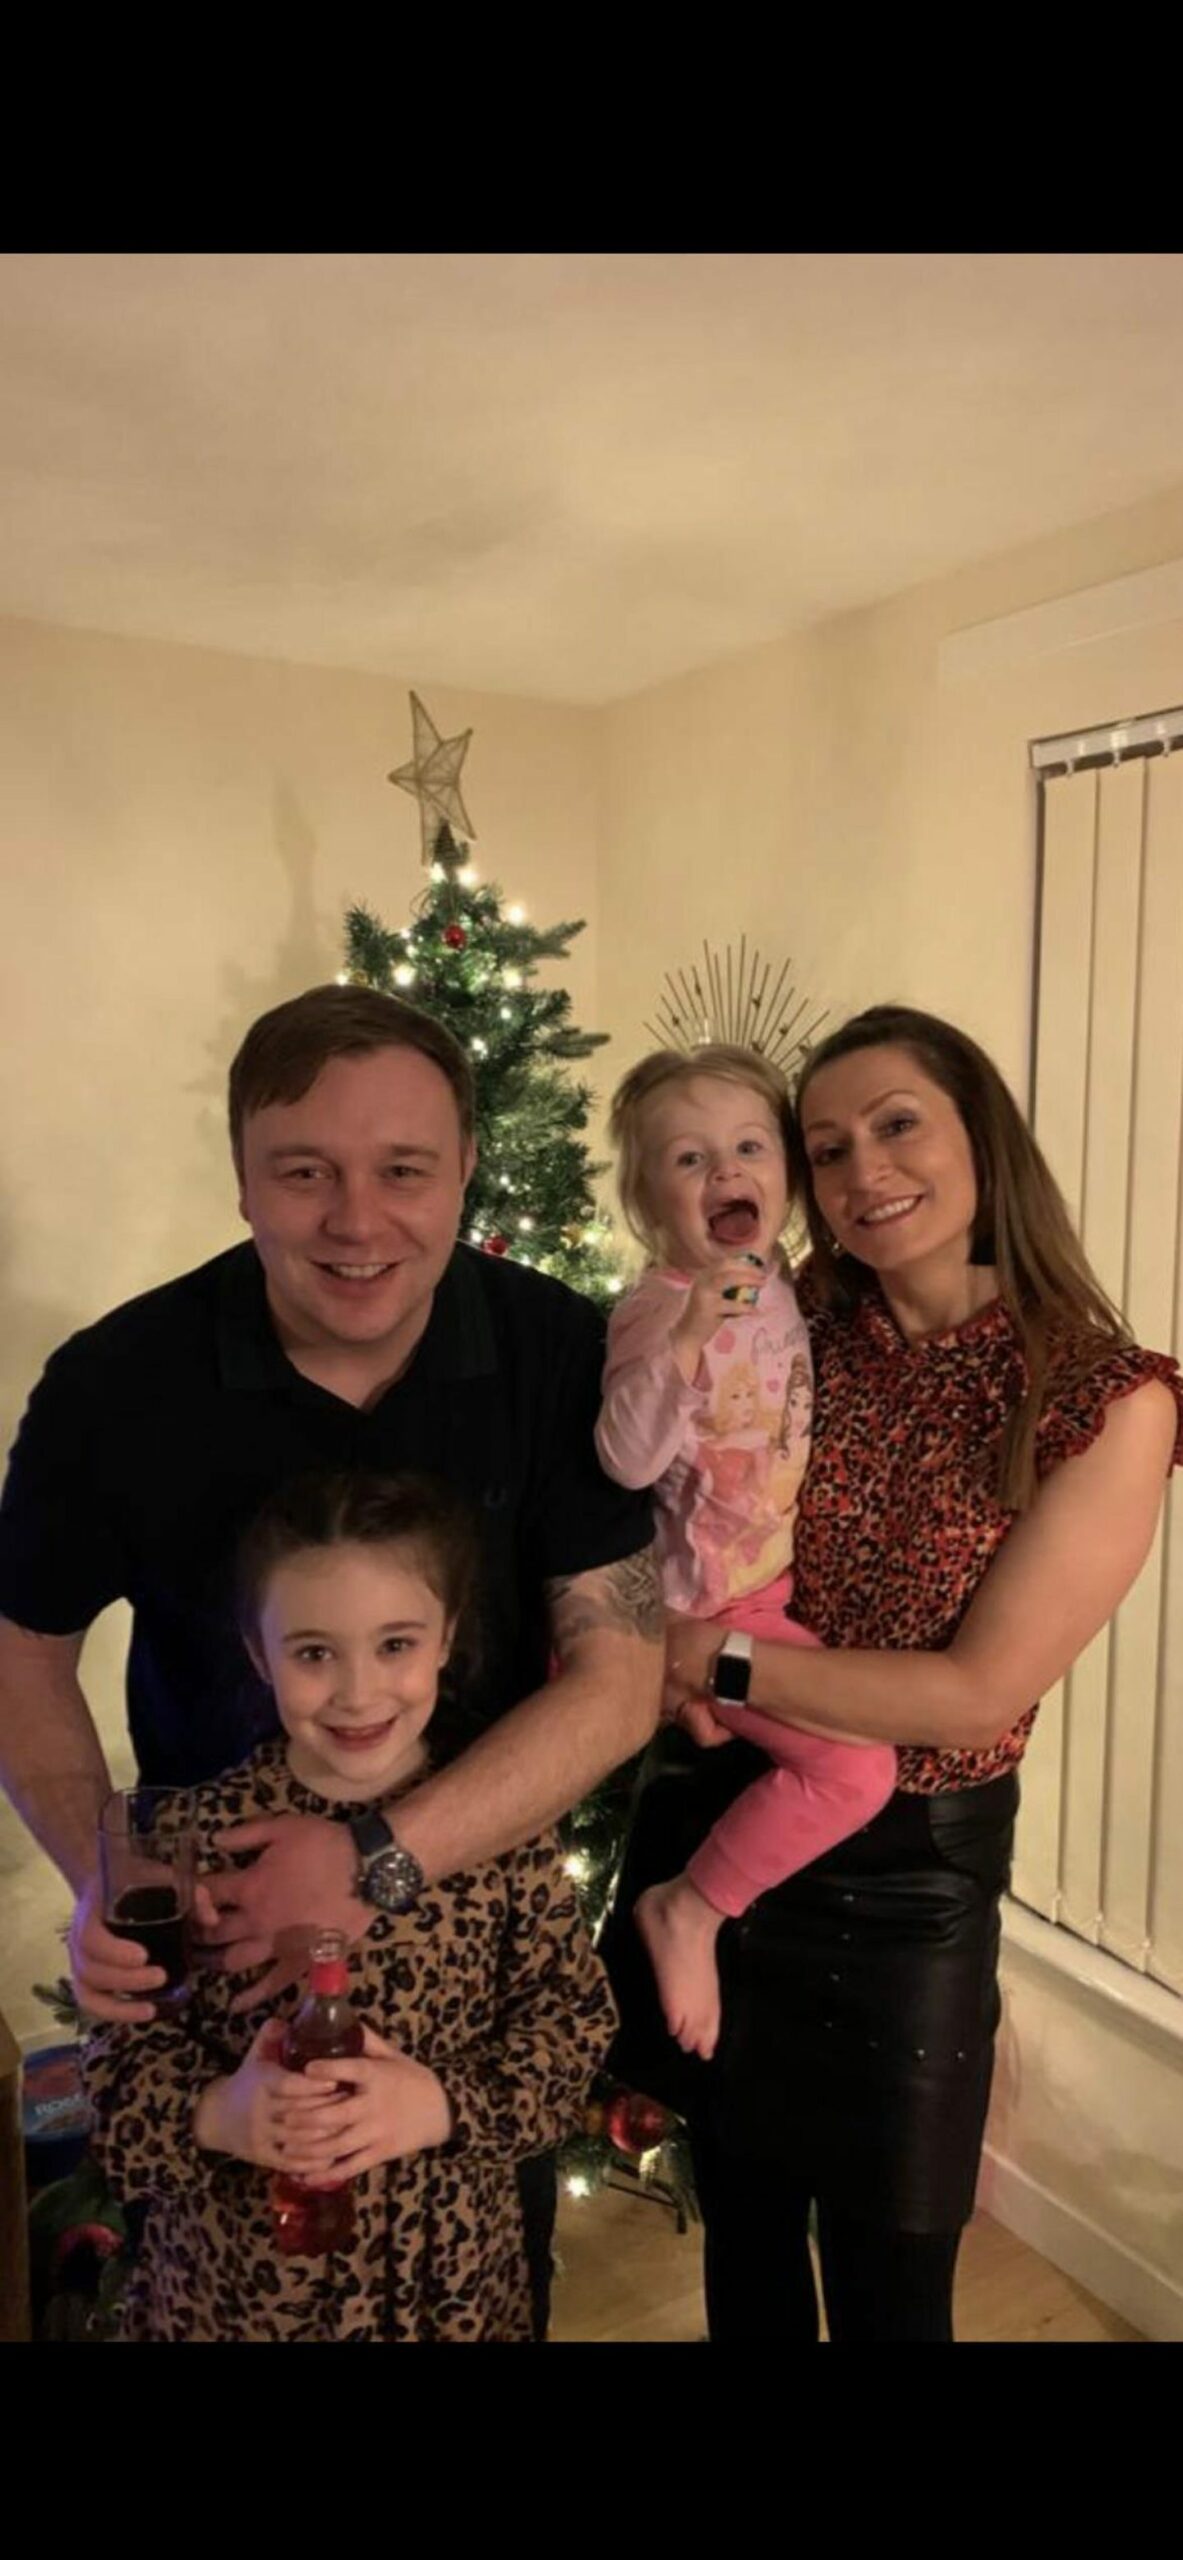 Ross and Pamela with Layla-May and Scarlett.